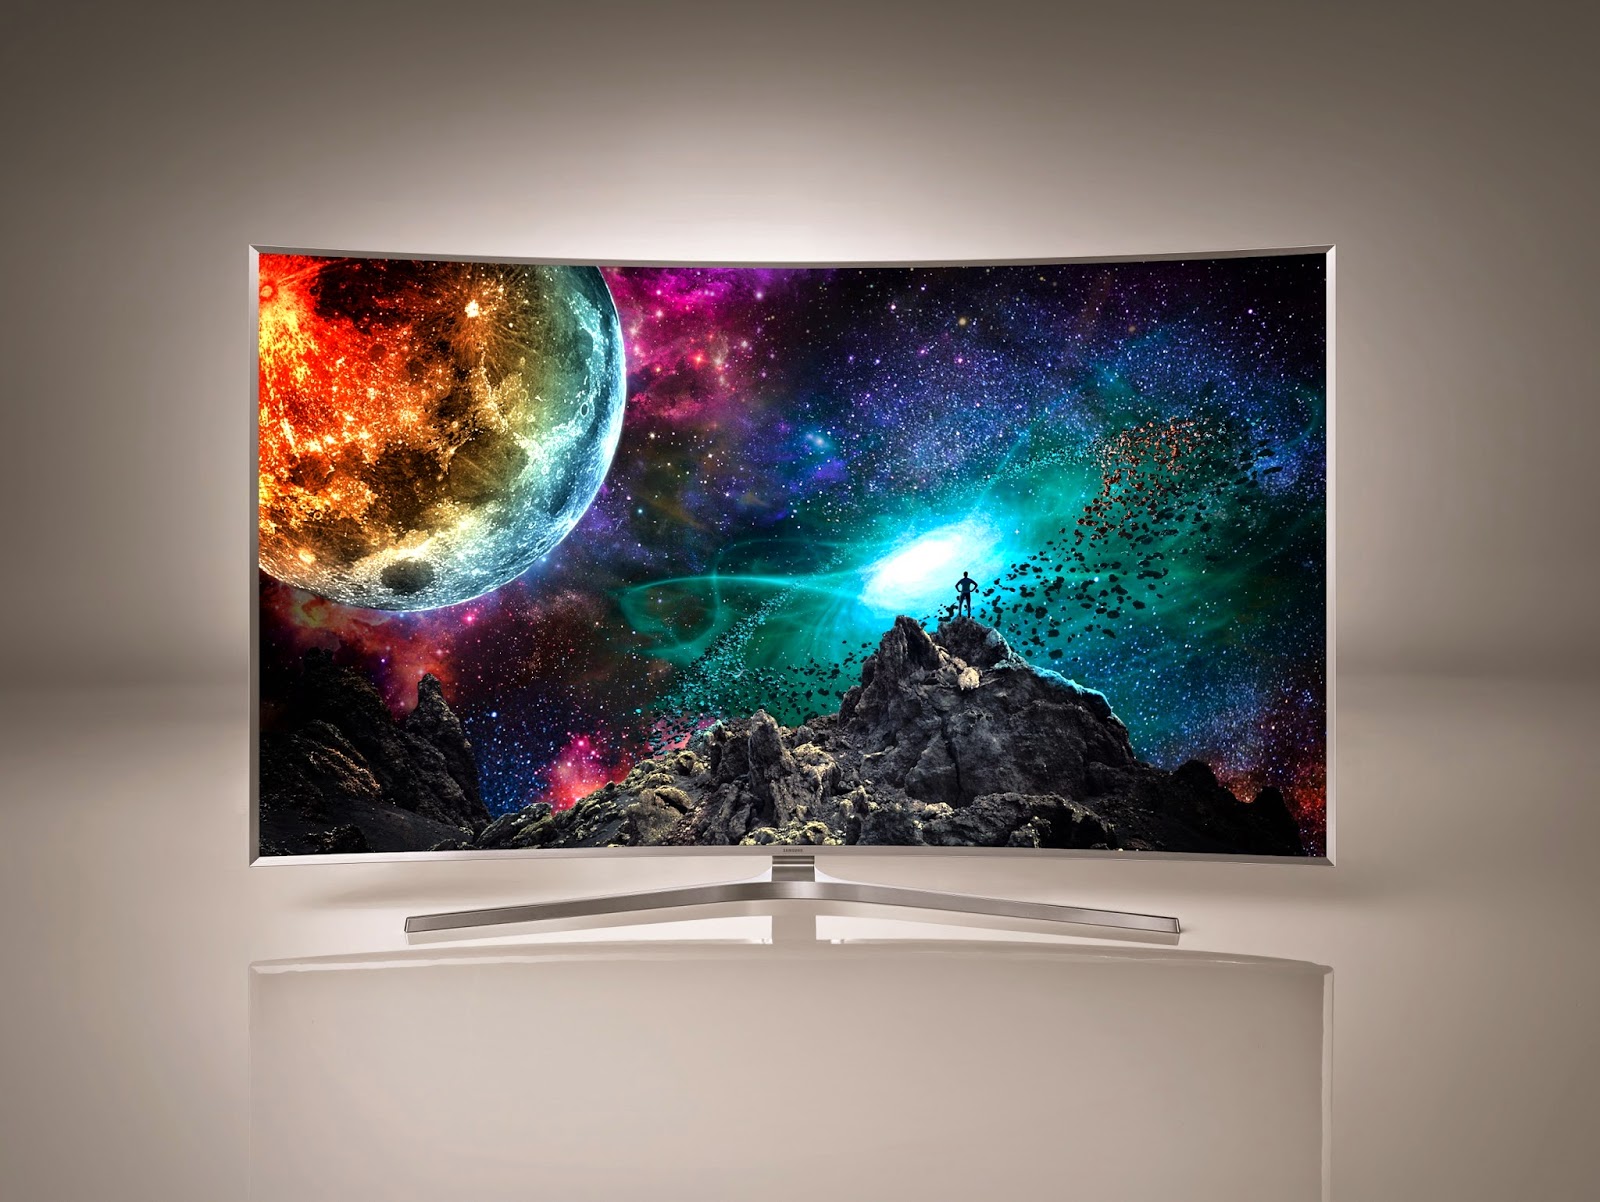 Samsung SUHD TV Lineup Introduced at CES 2015 Ψυχαγωγια